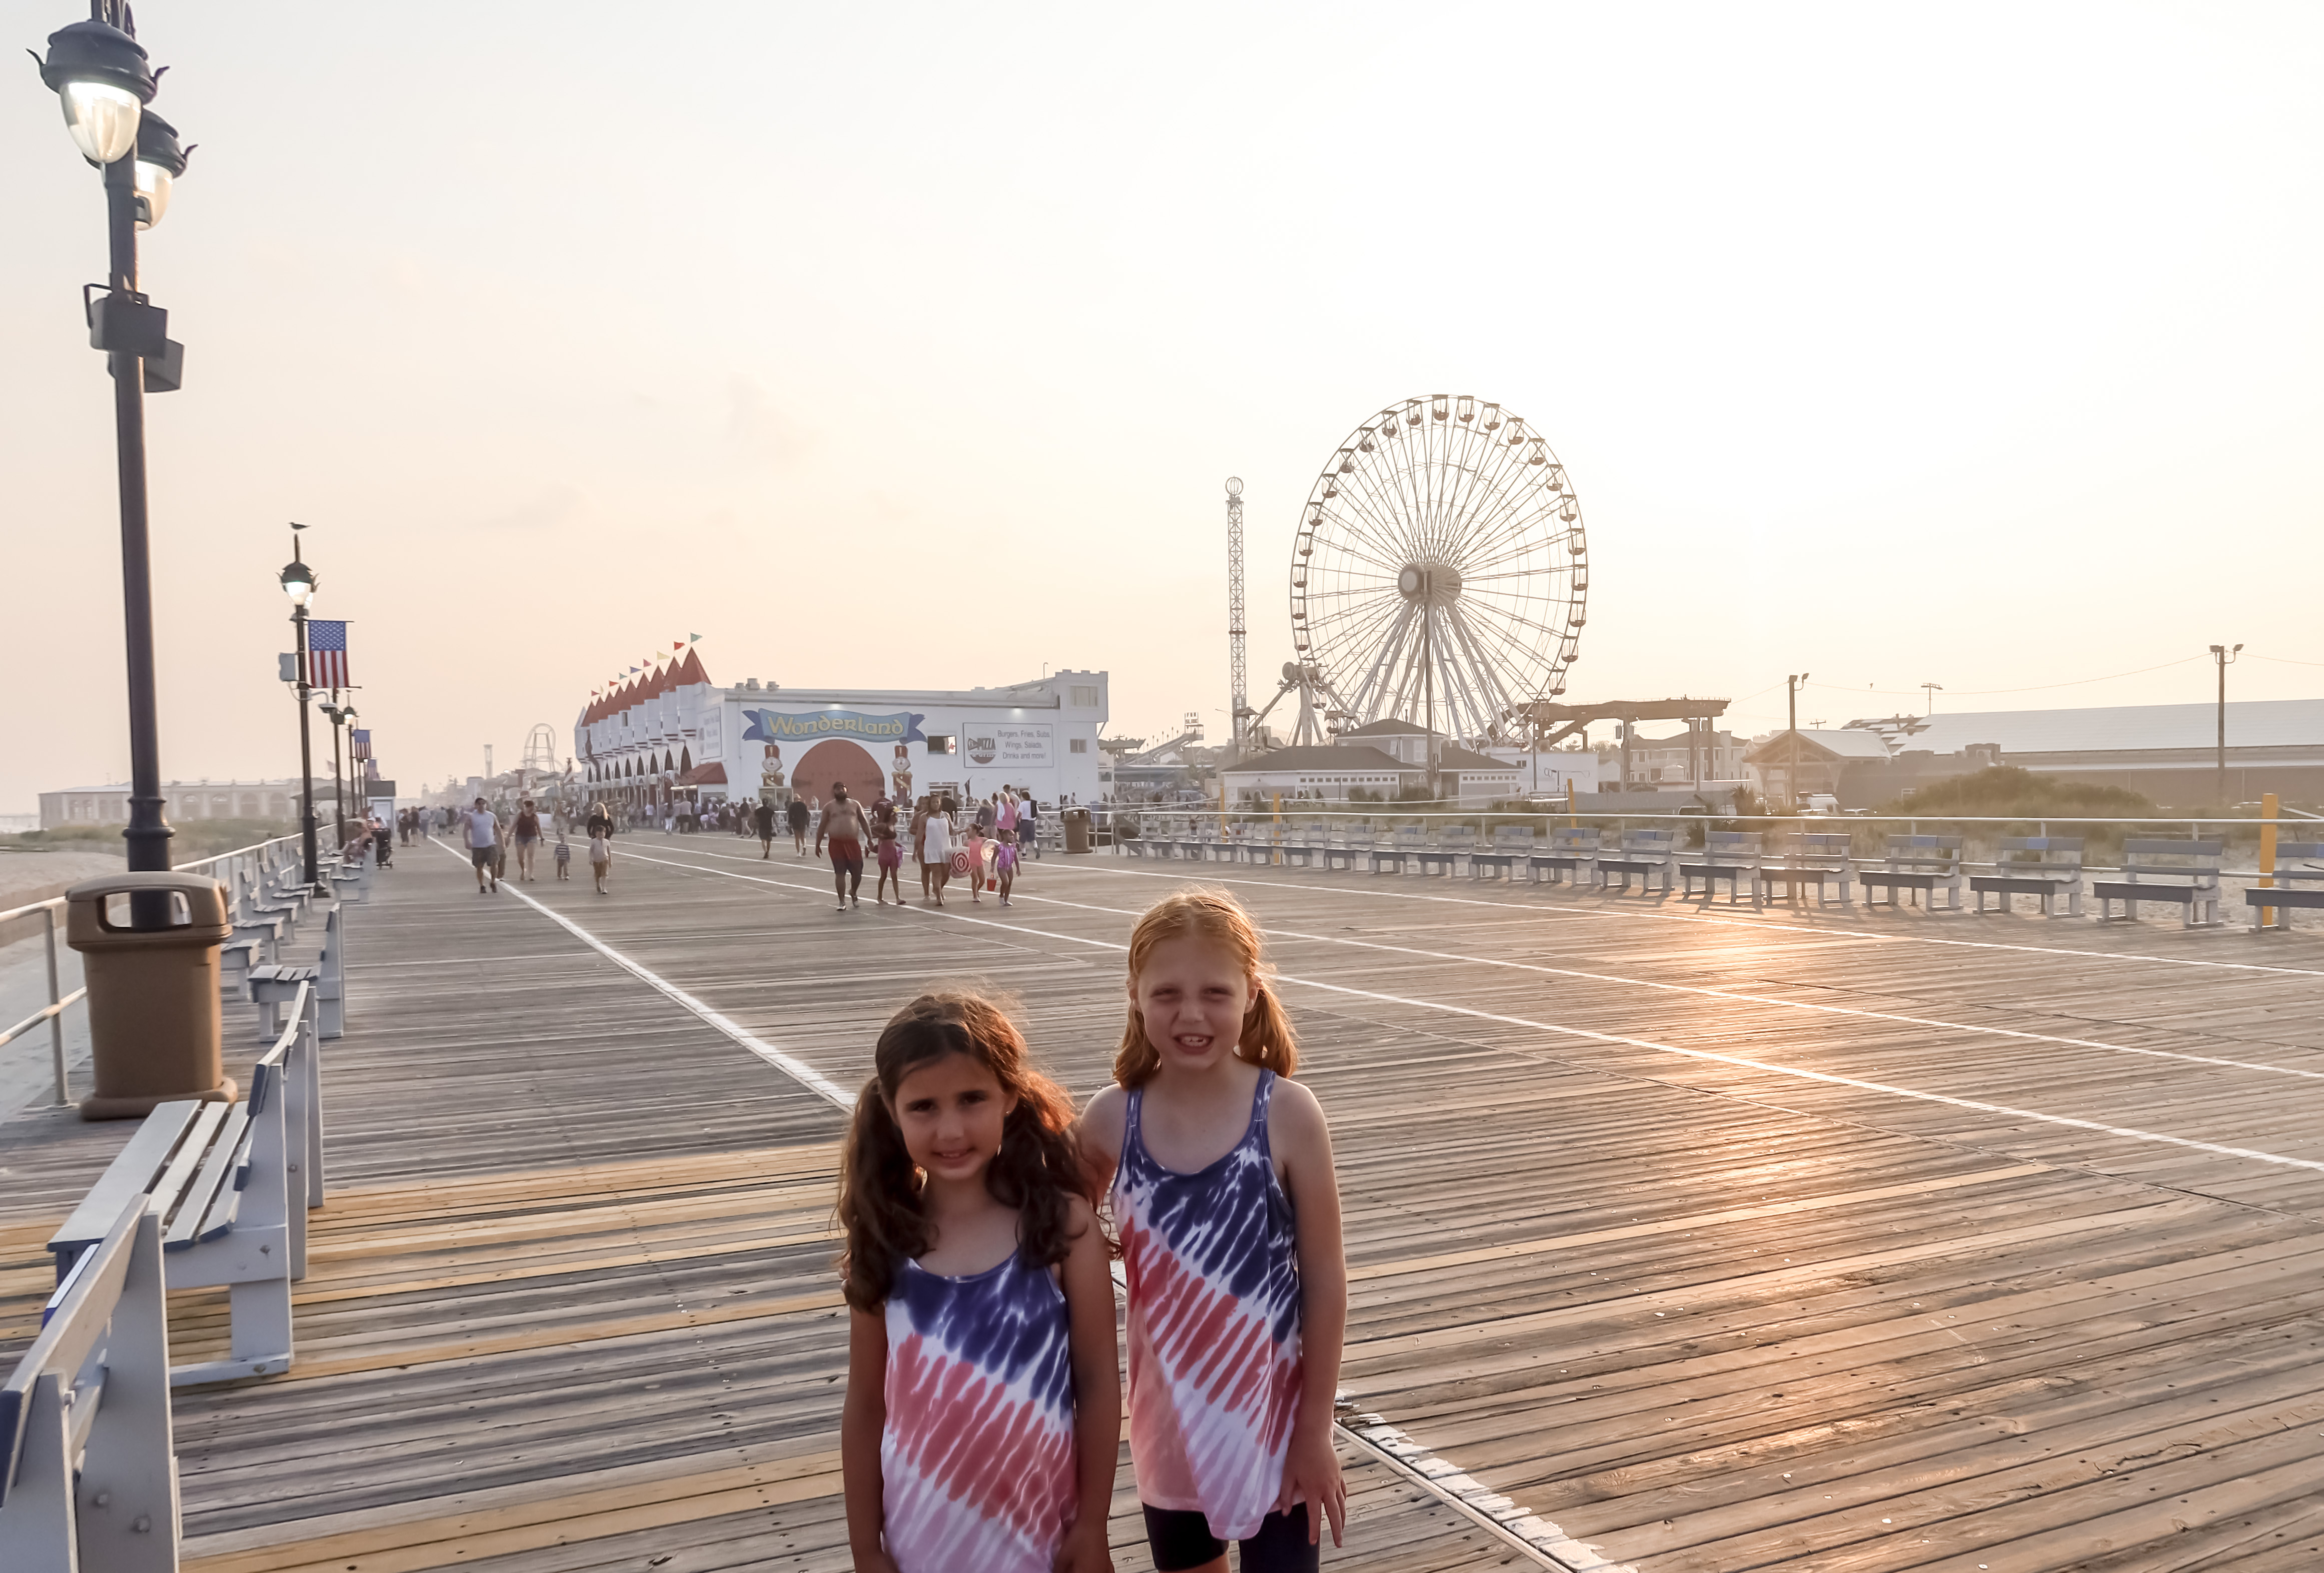 WHAT IS THERE TO DO IN SOUTH JERSEY WITH KIDS?